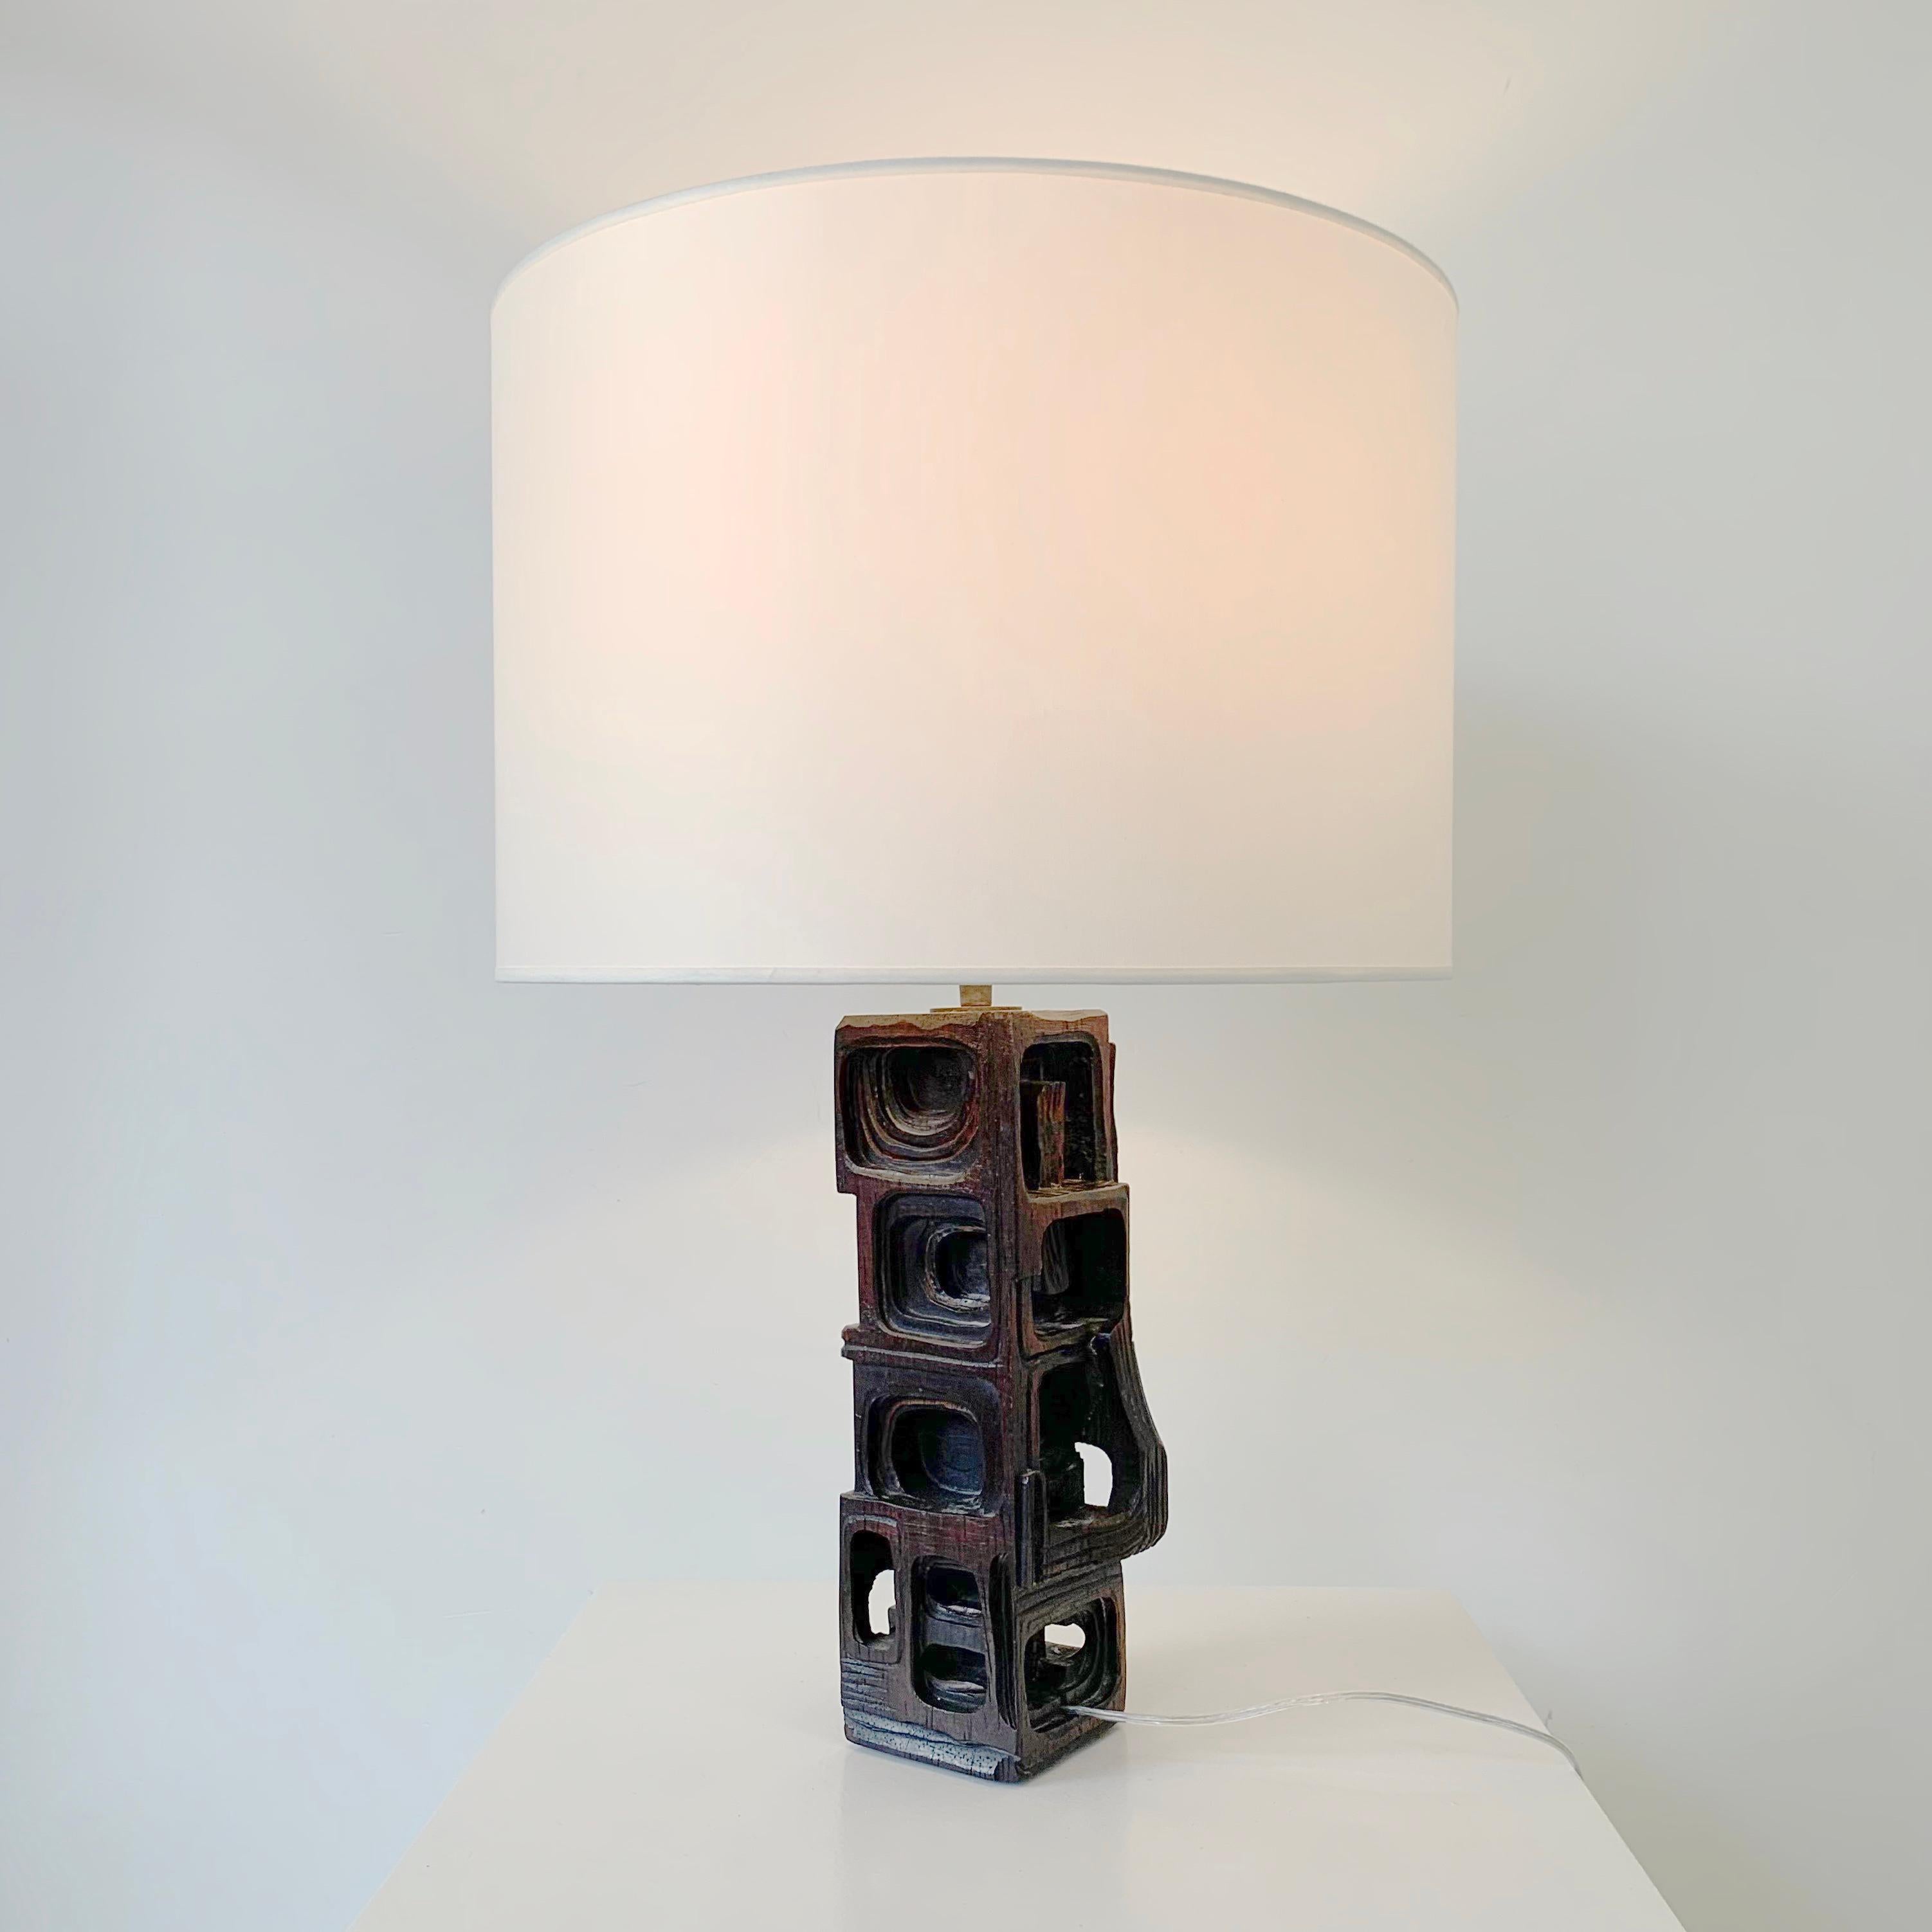 Mid-Century Modern Sculptural Hand Carved Table Lamp by Gianni Pinna, c.1970, Italy.